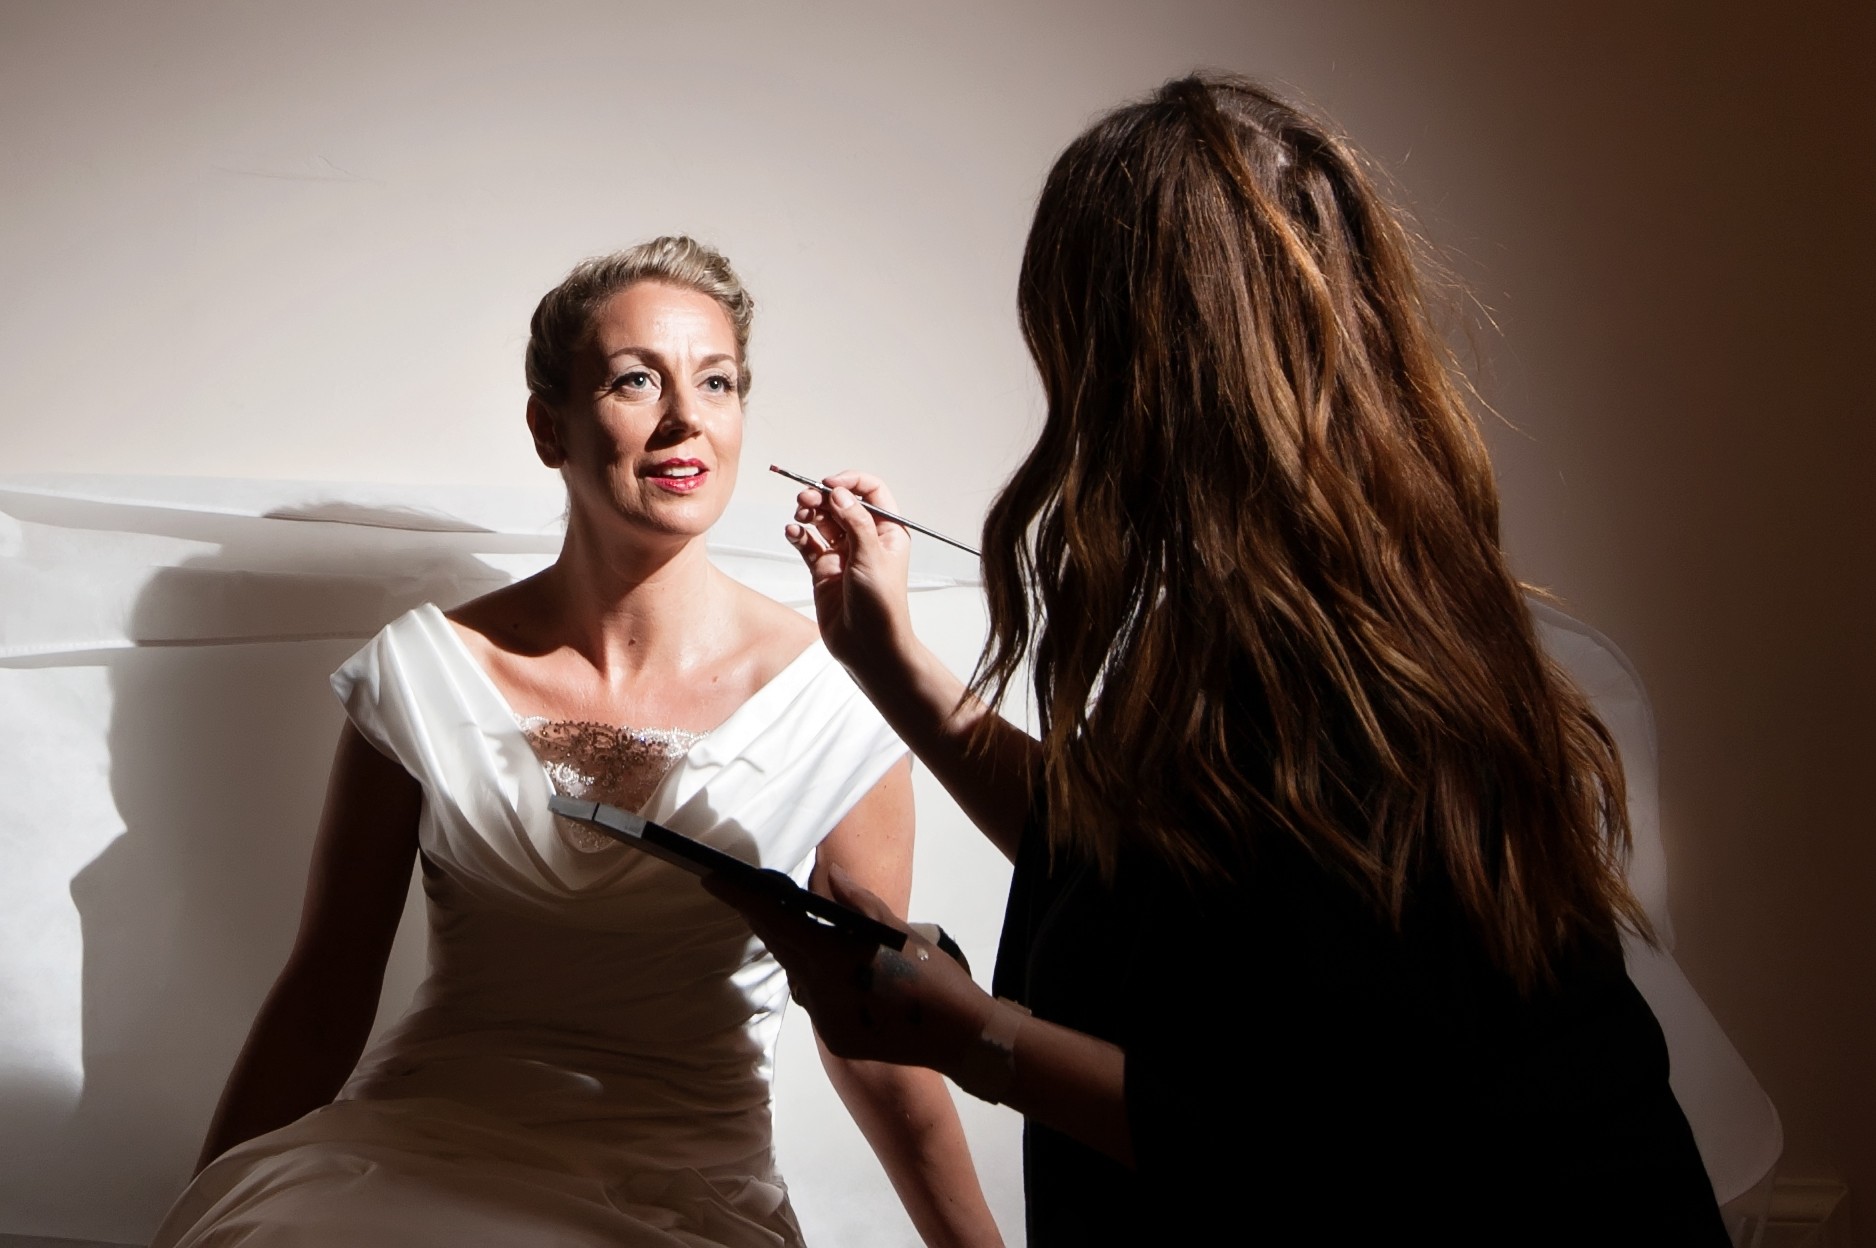 Bridy the beautiful Bride! Make-up by Tina Brocklebank.Photo by GJA photography.